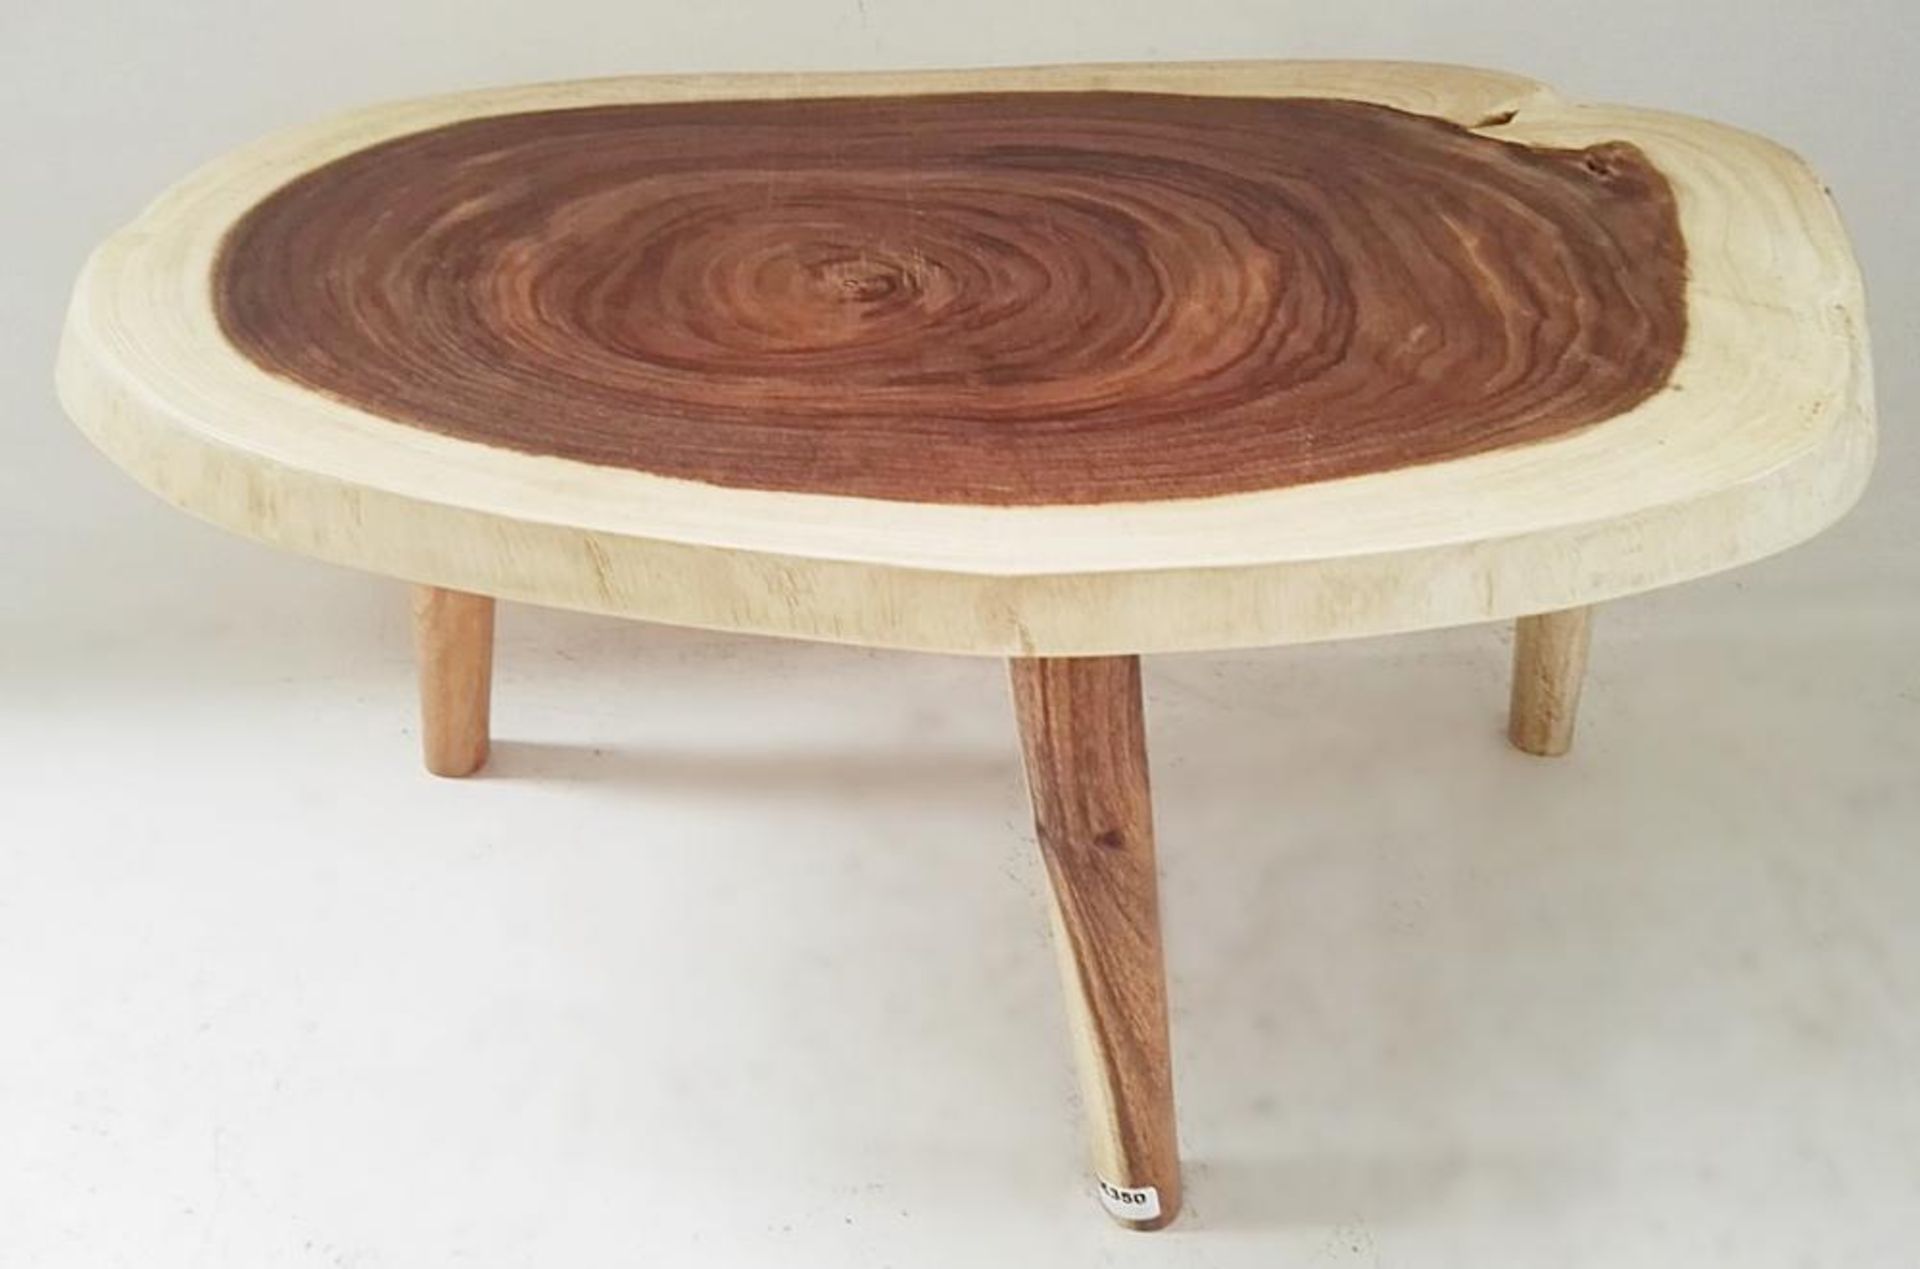 1 x Unique Three Legged Reclaimed Solid Tree Trunk Coffee Table - Dimensions (approx): W90 x D56cm,